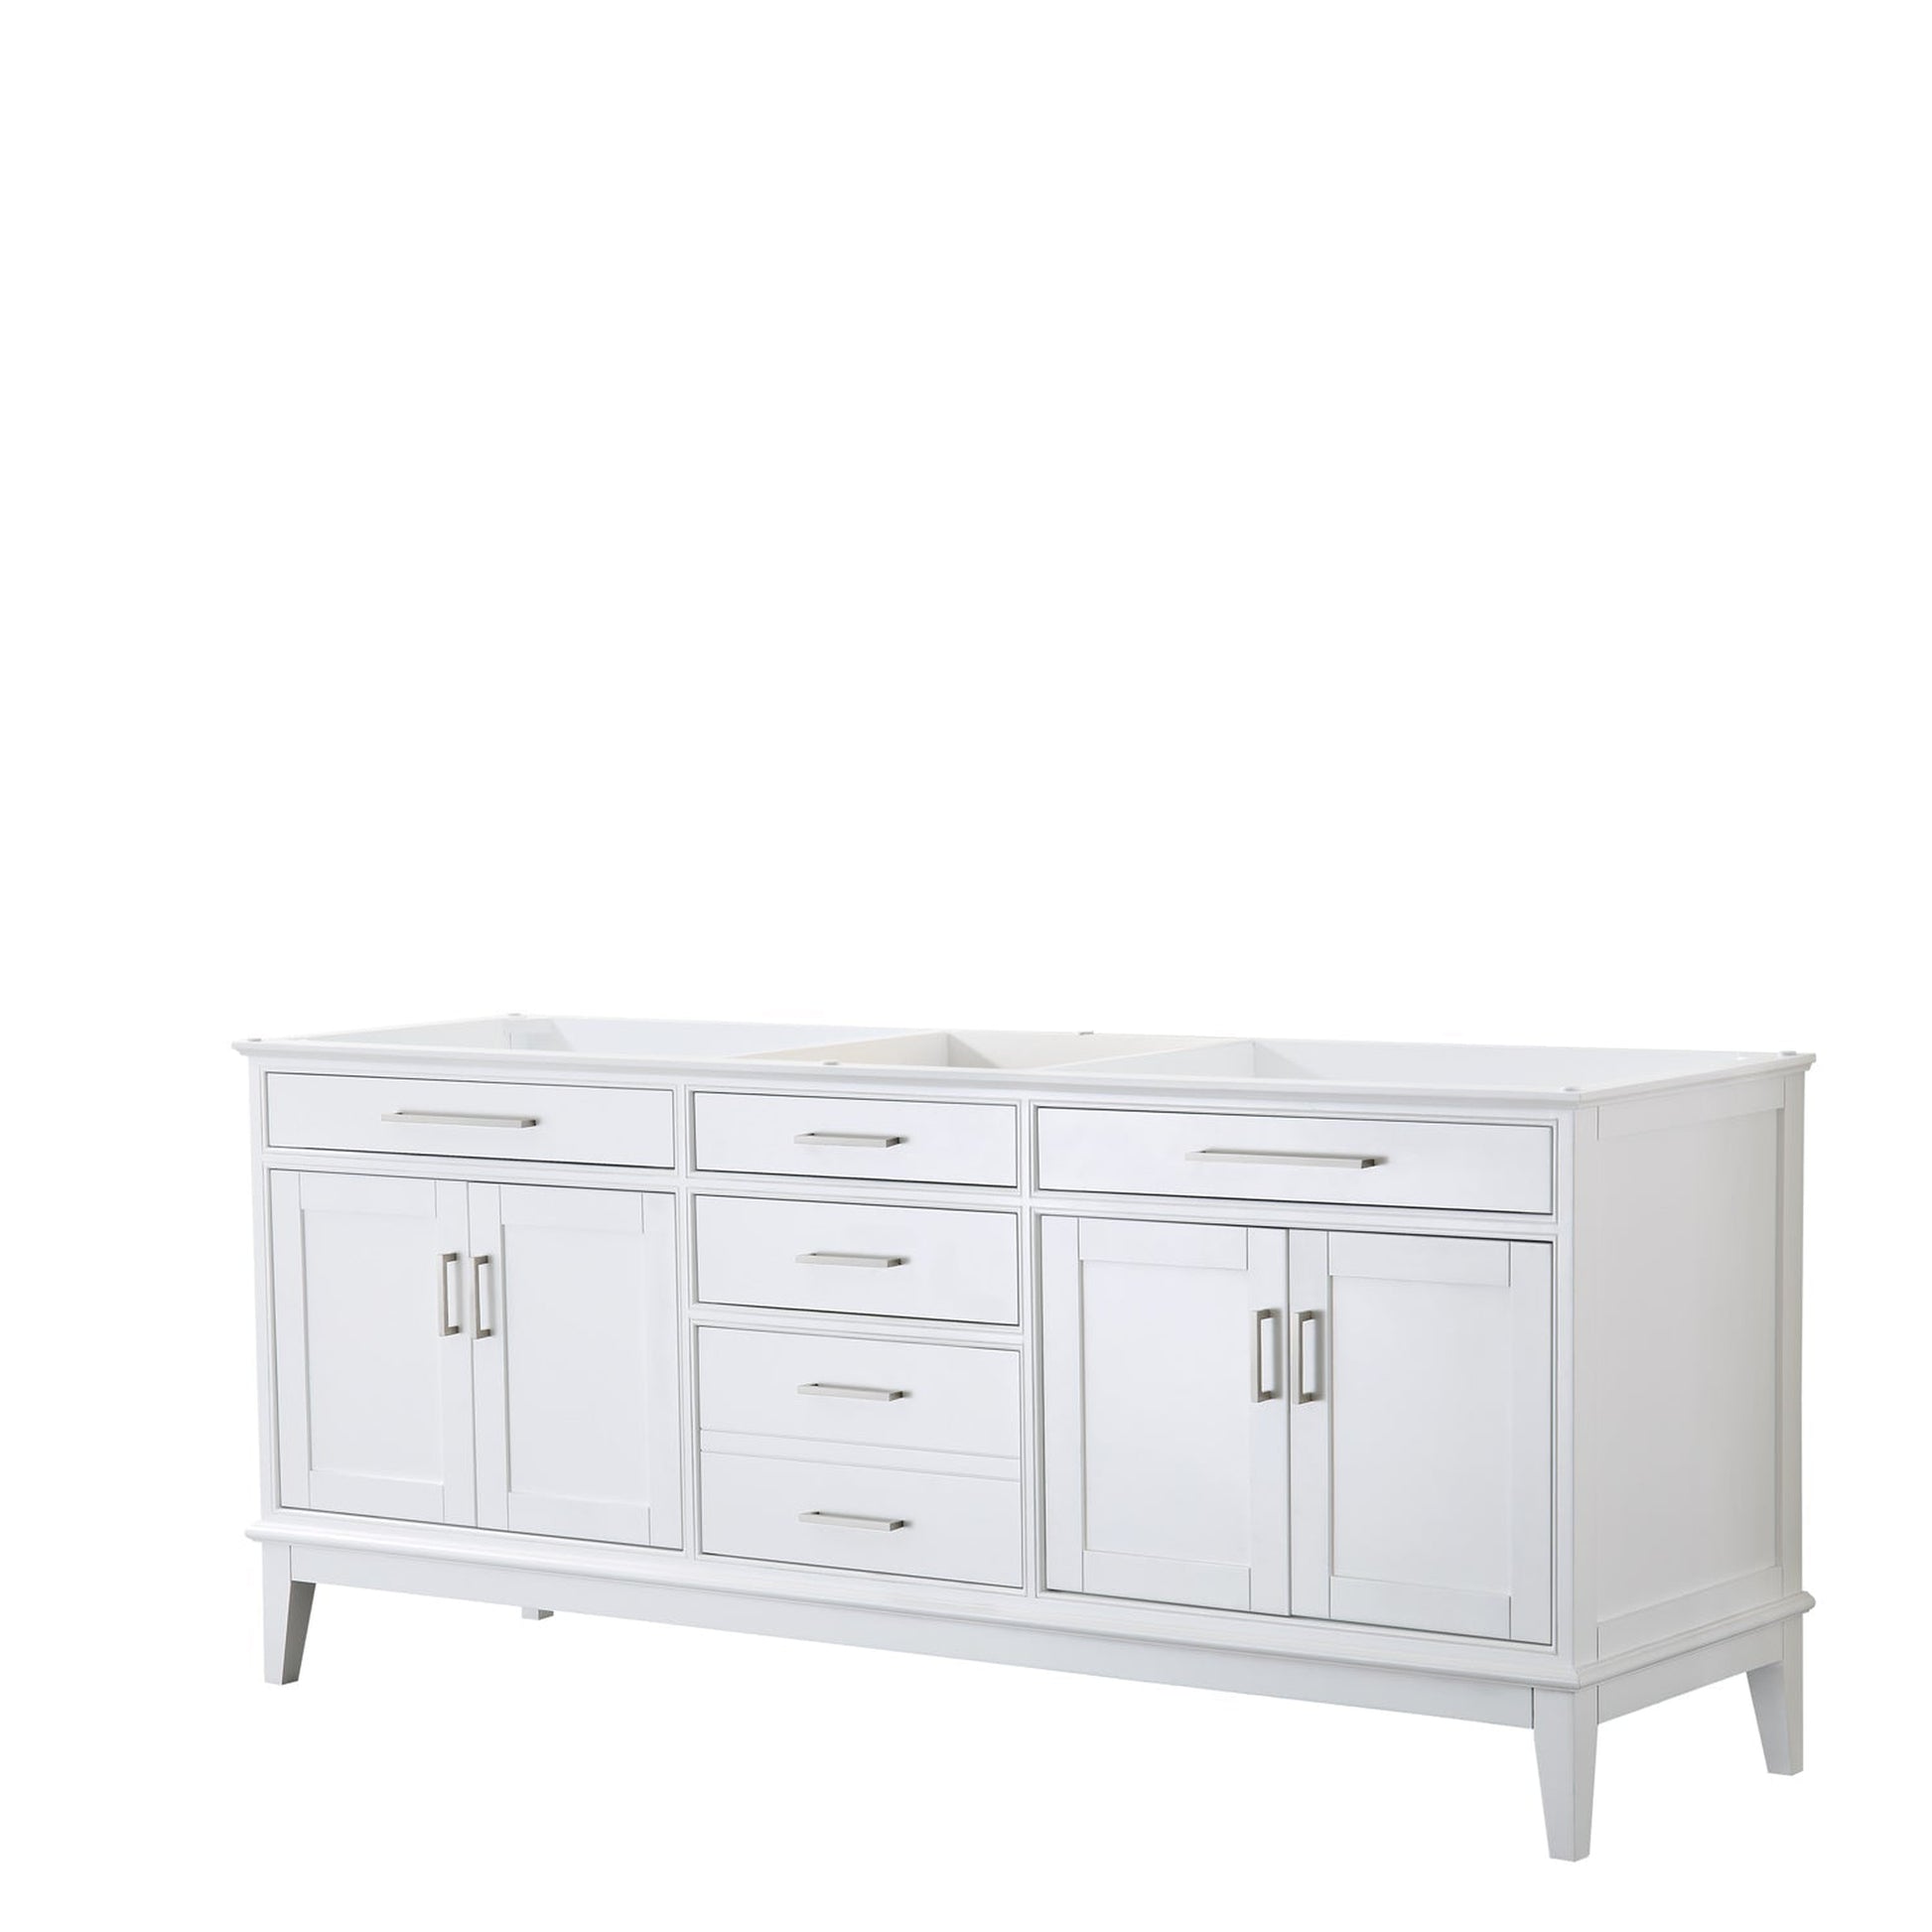 Wyndham Collection Margate 80" Double Bathroom White Vanity